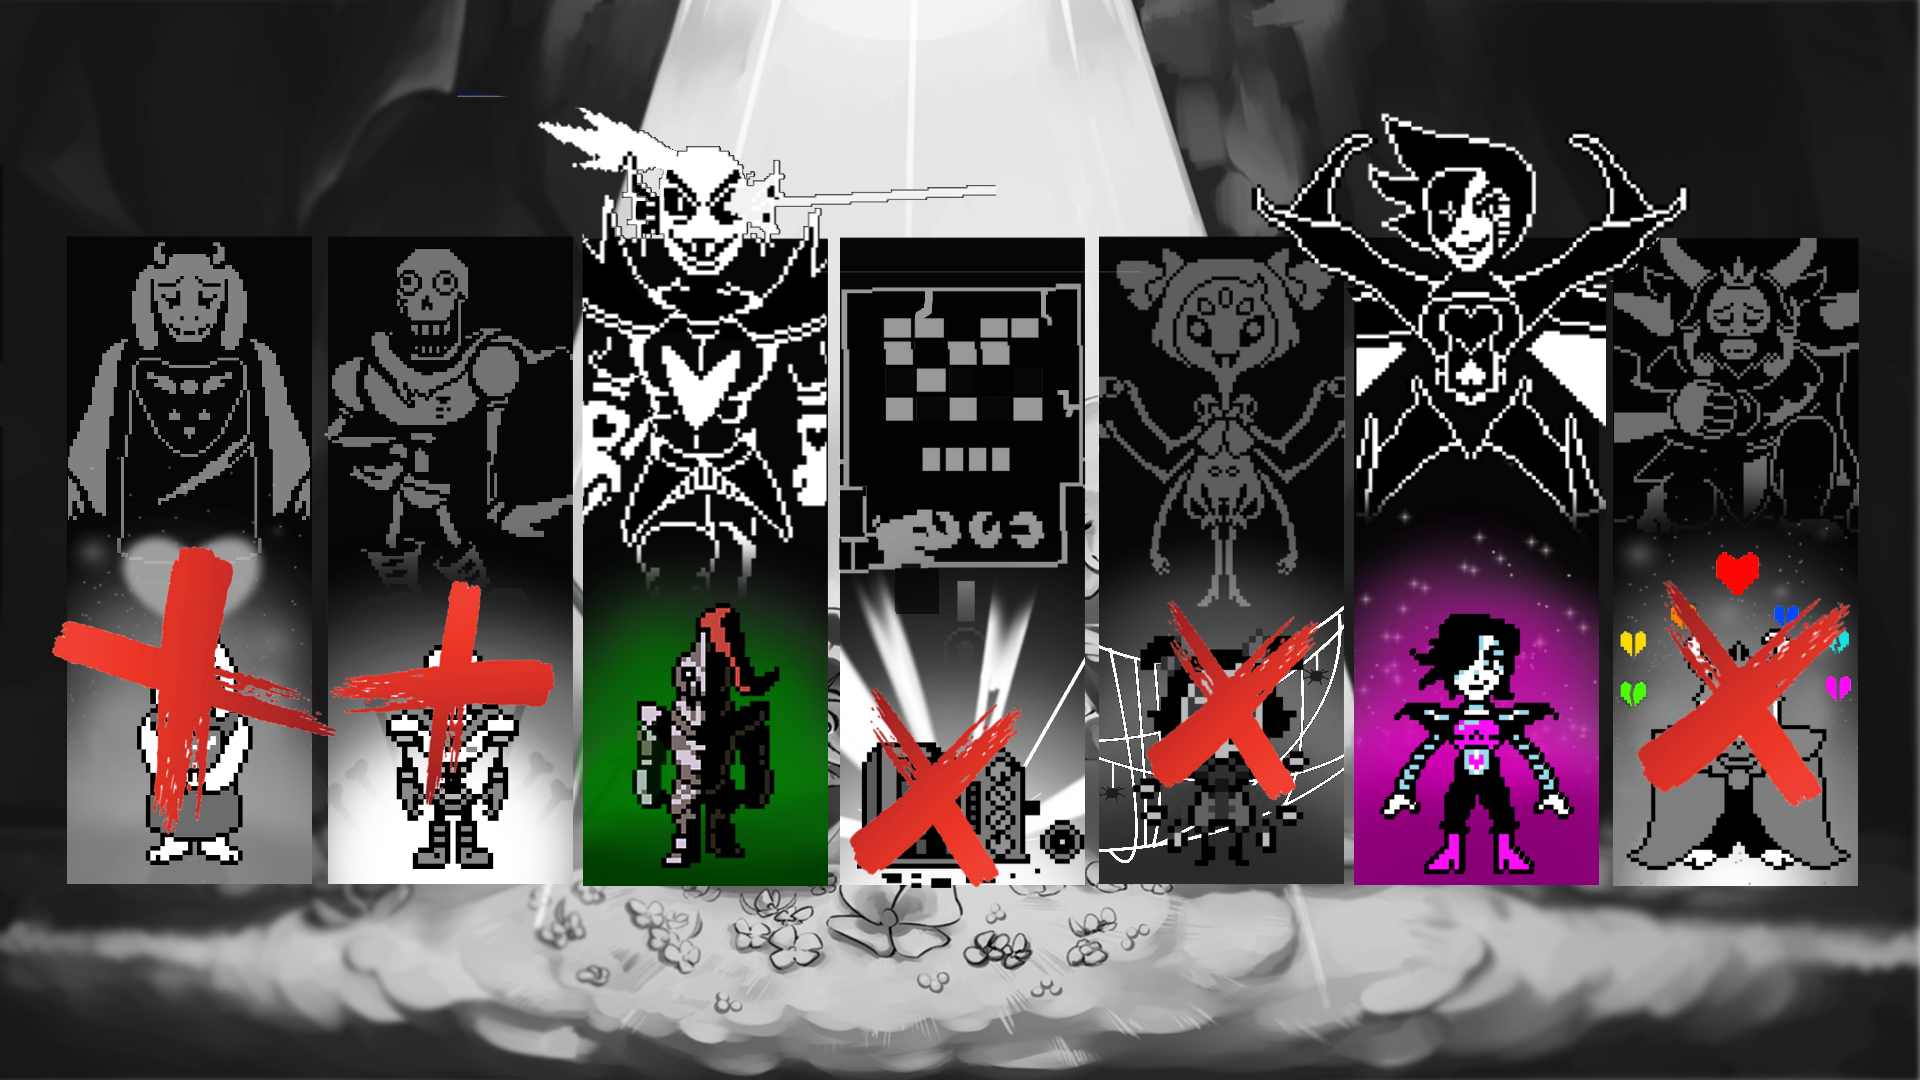 Undertale: Genocide Bosses by GizmoGamer2000 on